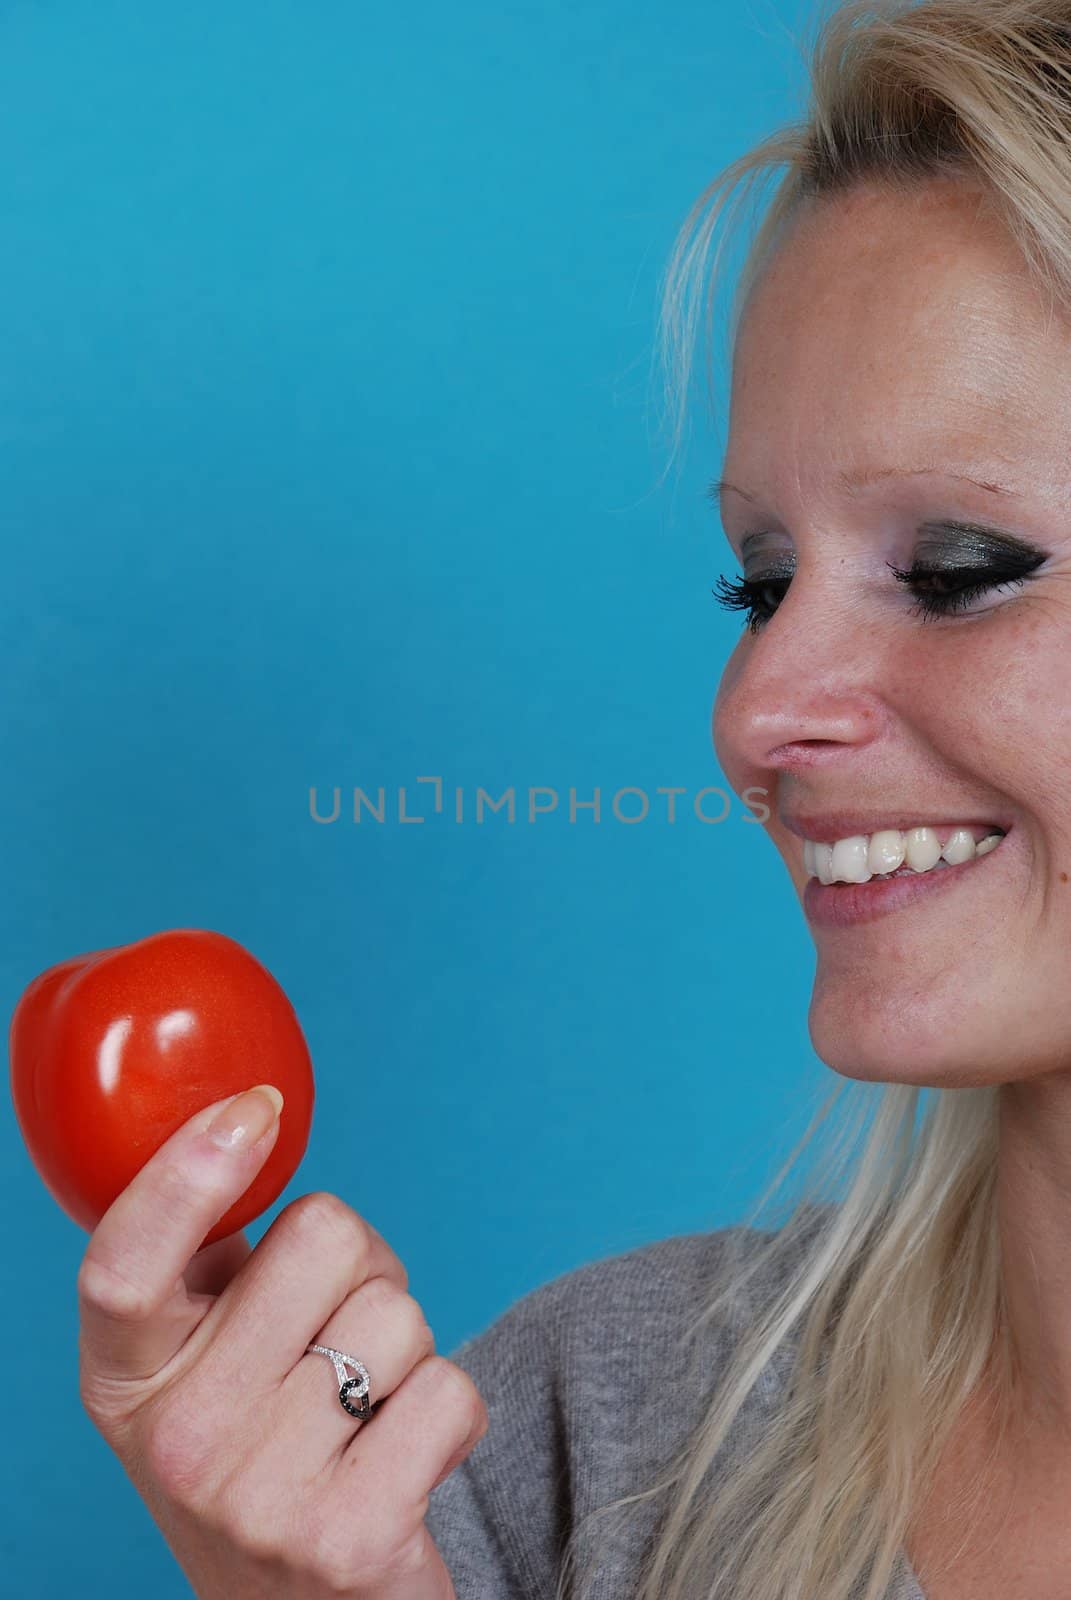 Blond womanl eating a tomato